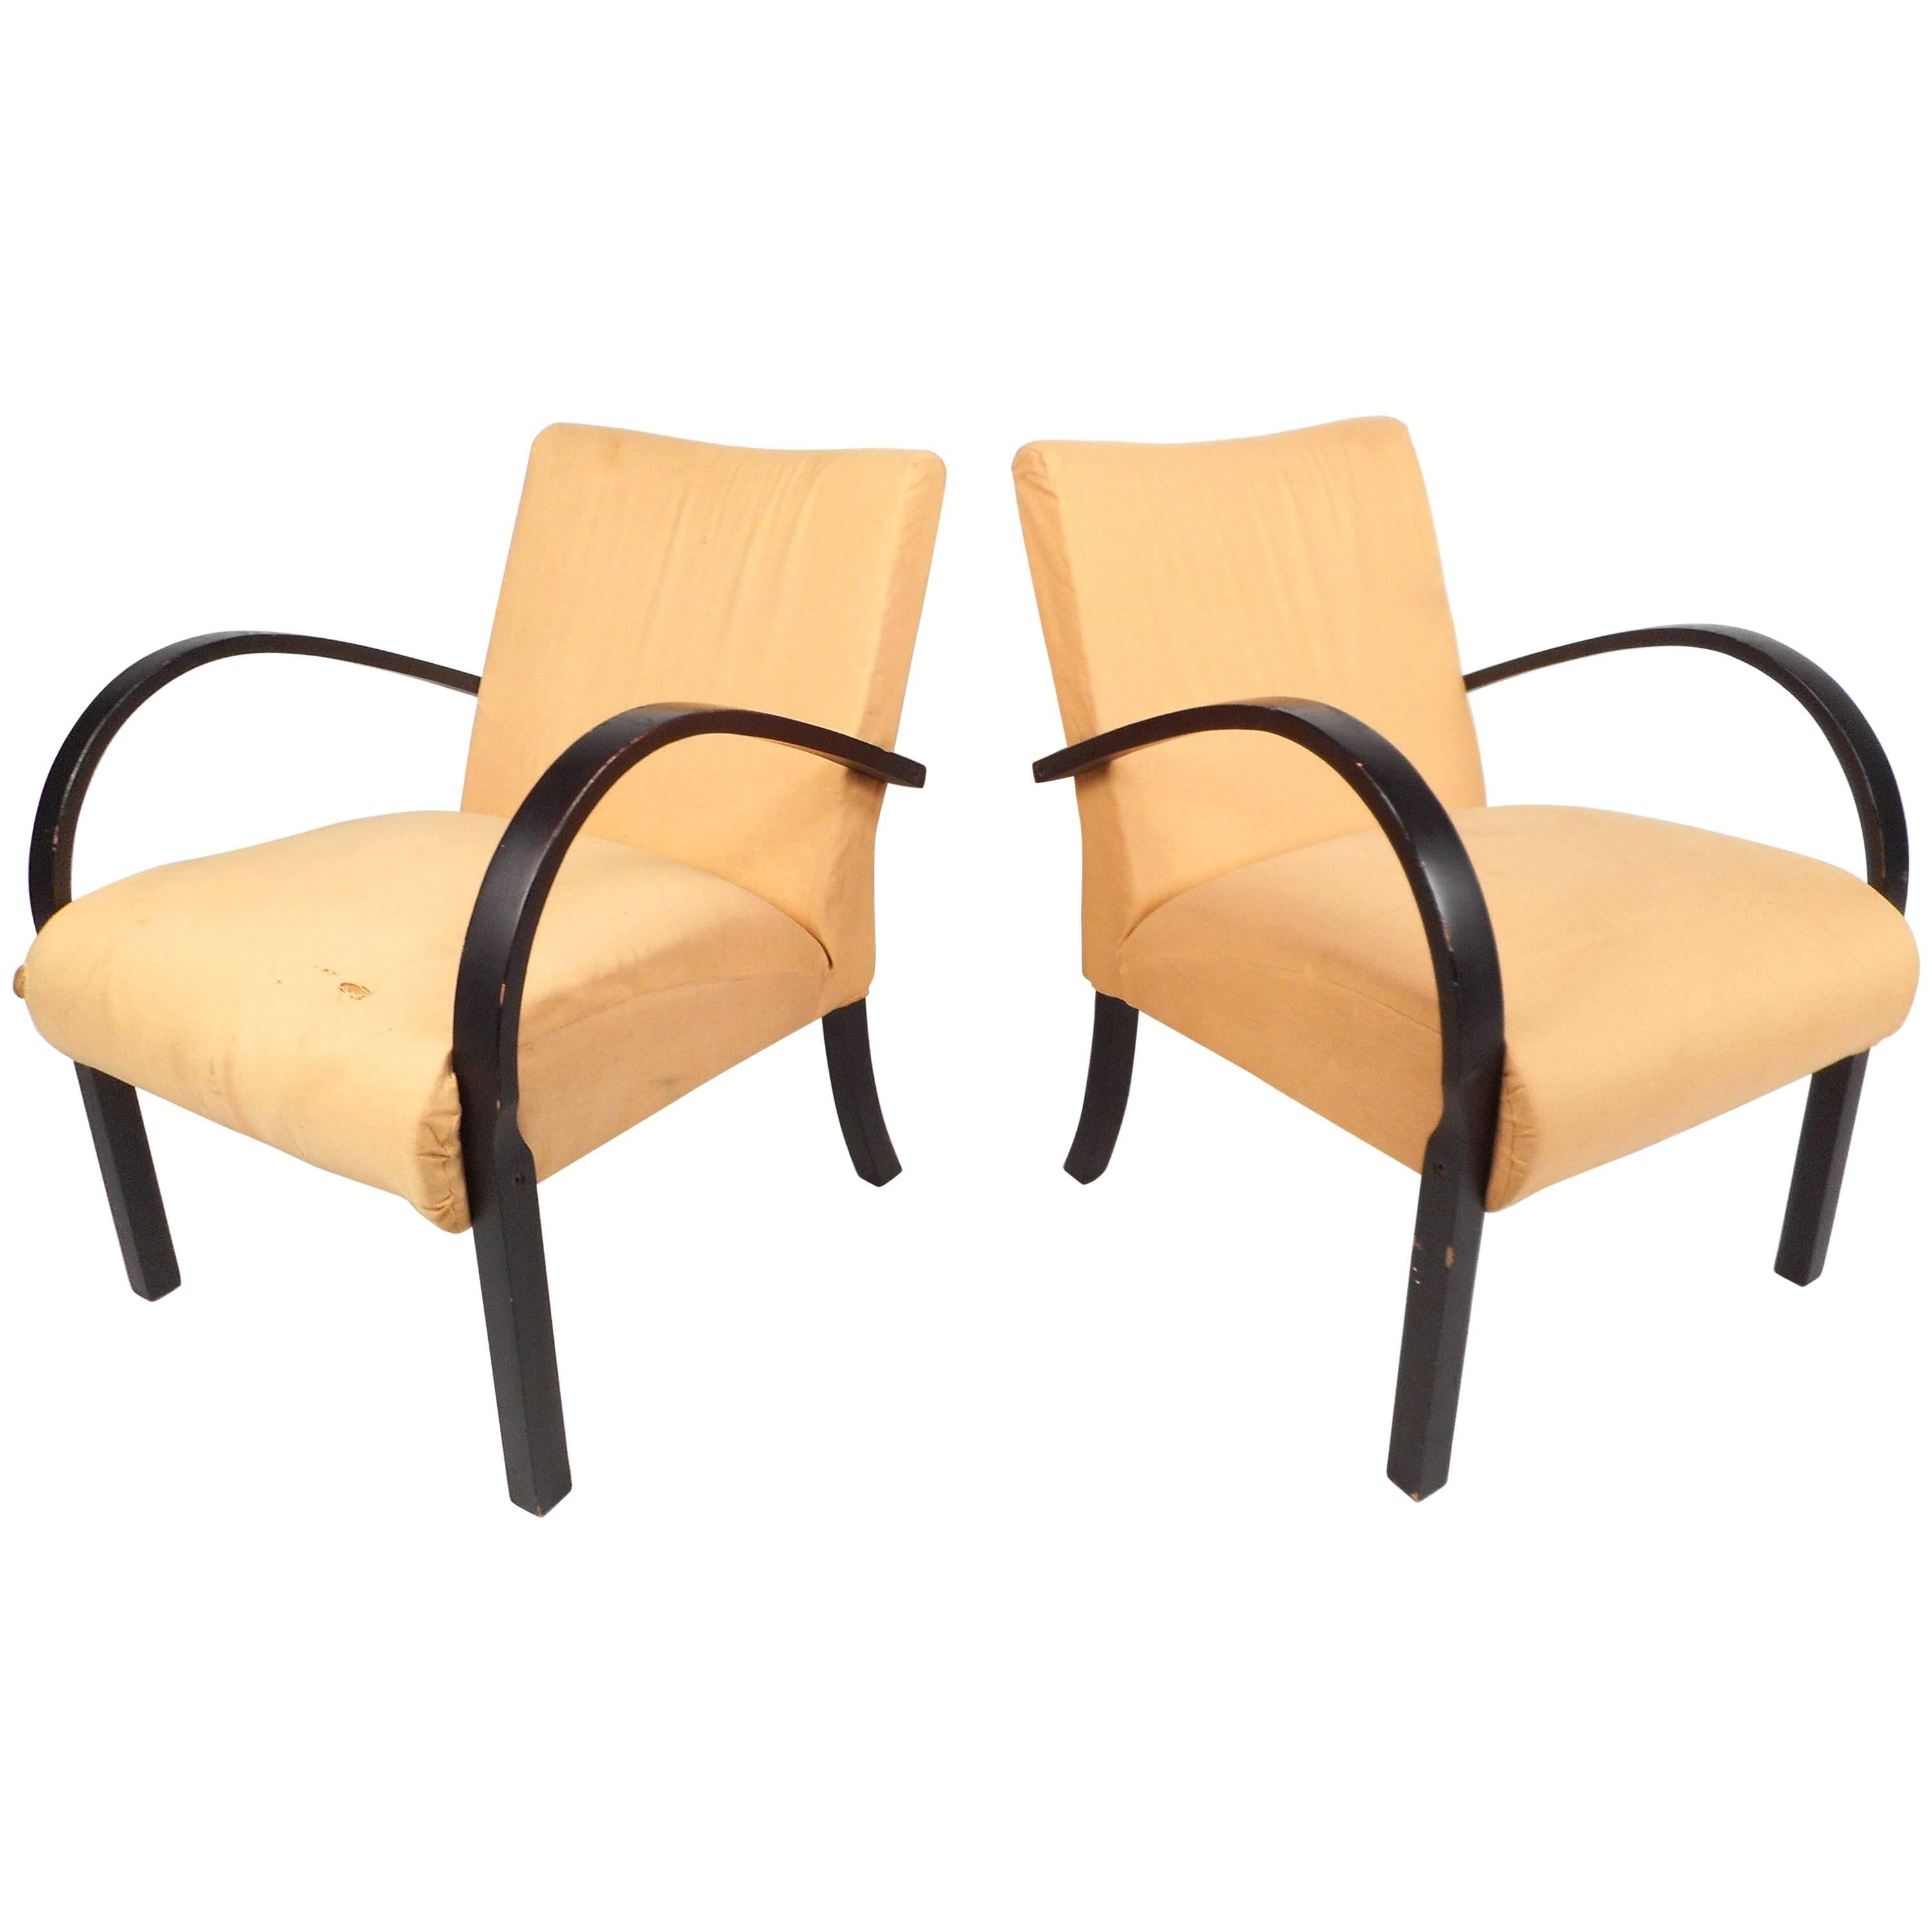 Unique Mid-Century Modern Lounge Chairs